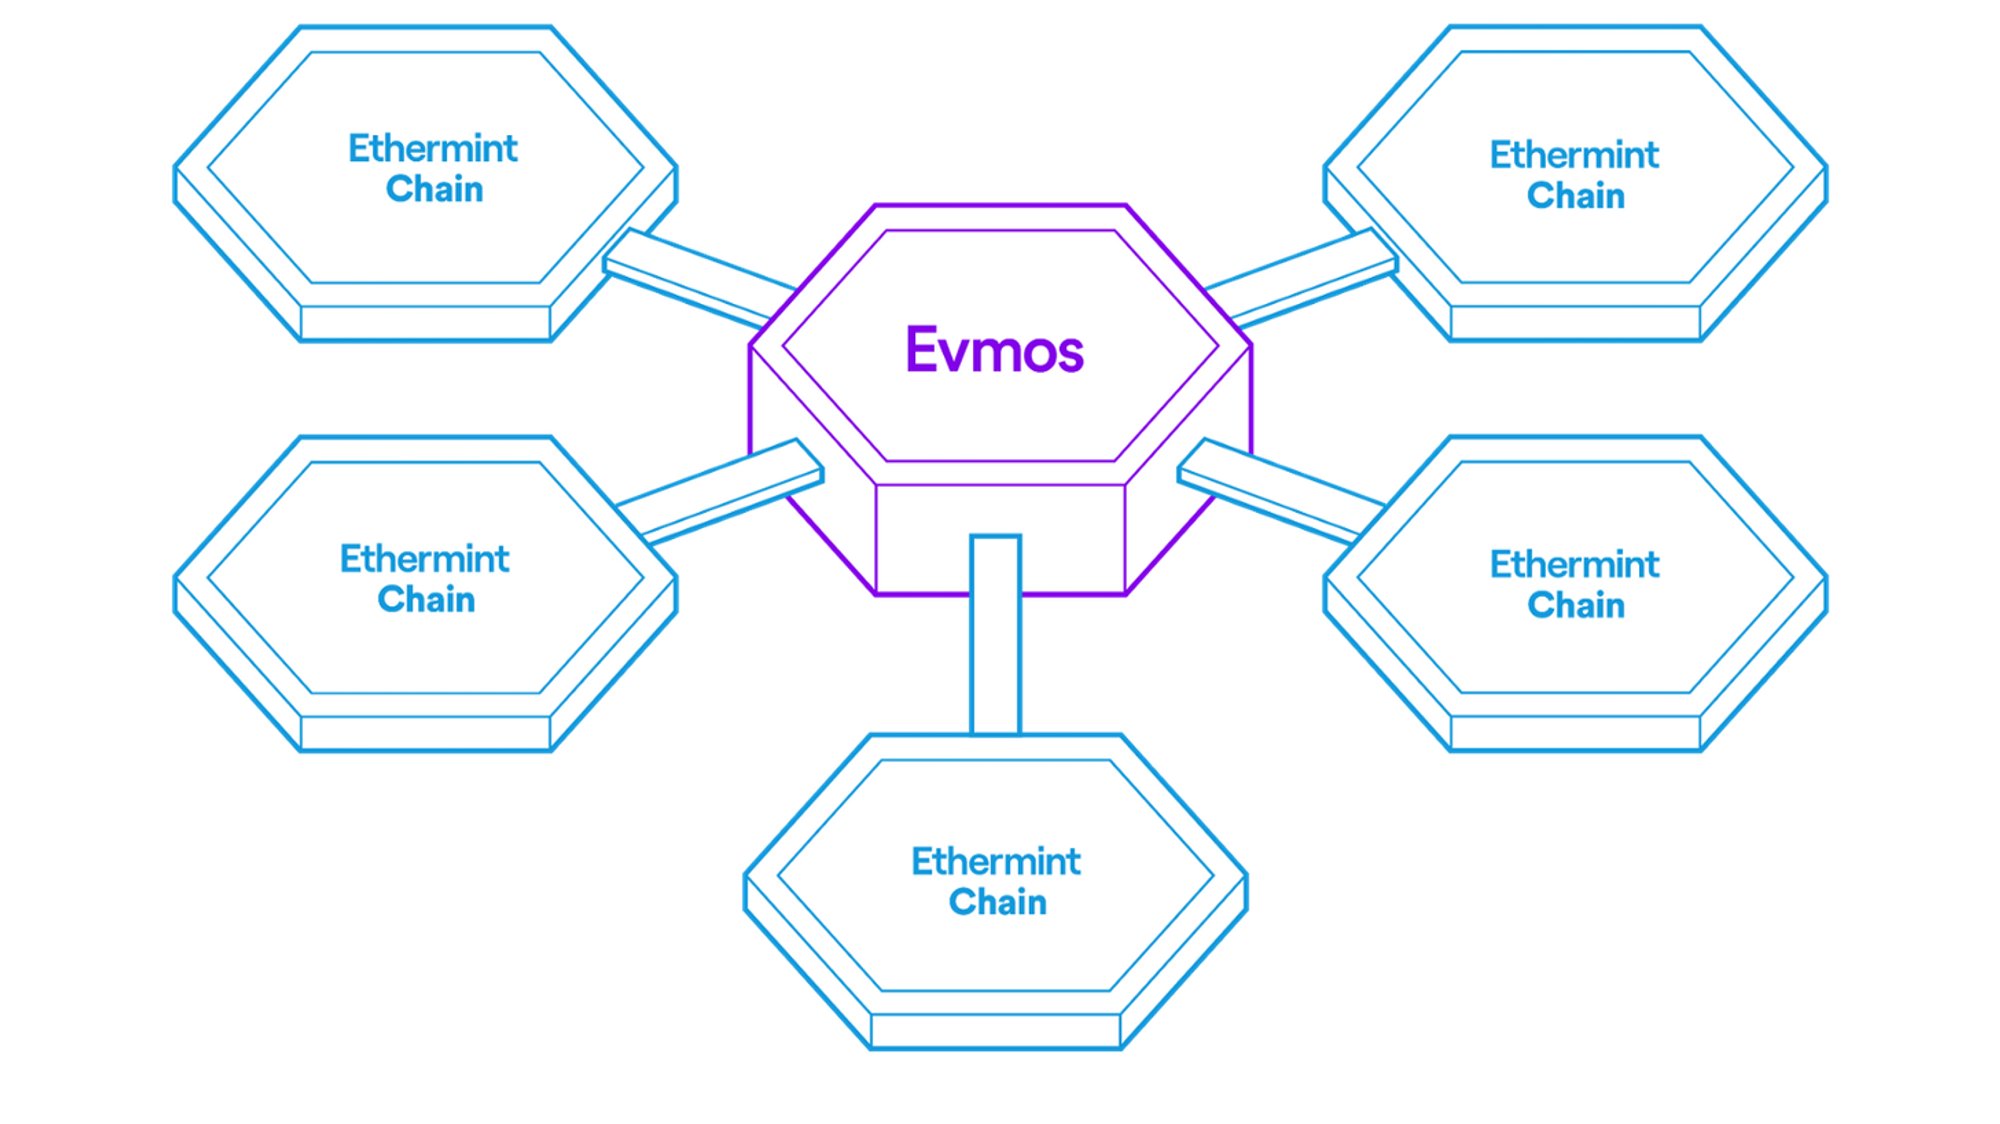 Evmos is the Ethermint hub that will aim to connect application-specific Ethermint chains, Cosmos chains (IBC), Ethereum (Gravity Bridge), and other EVM environments. 